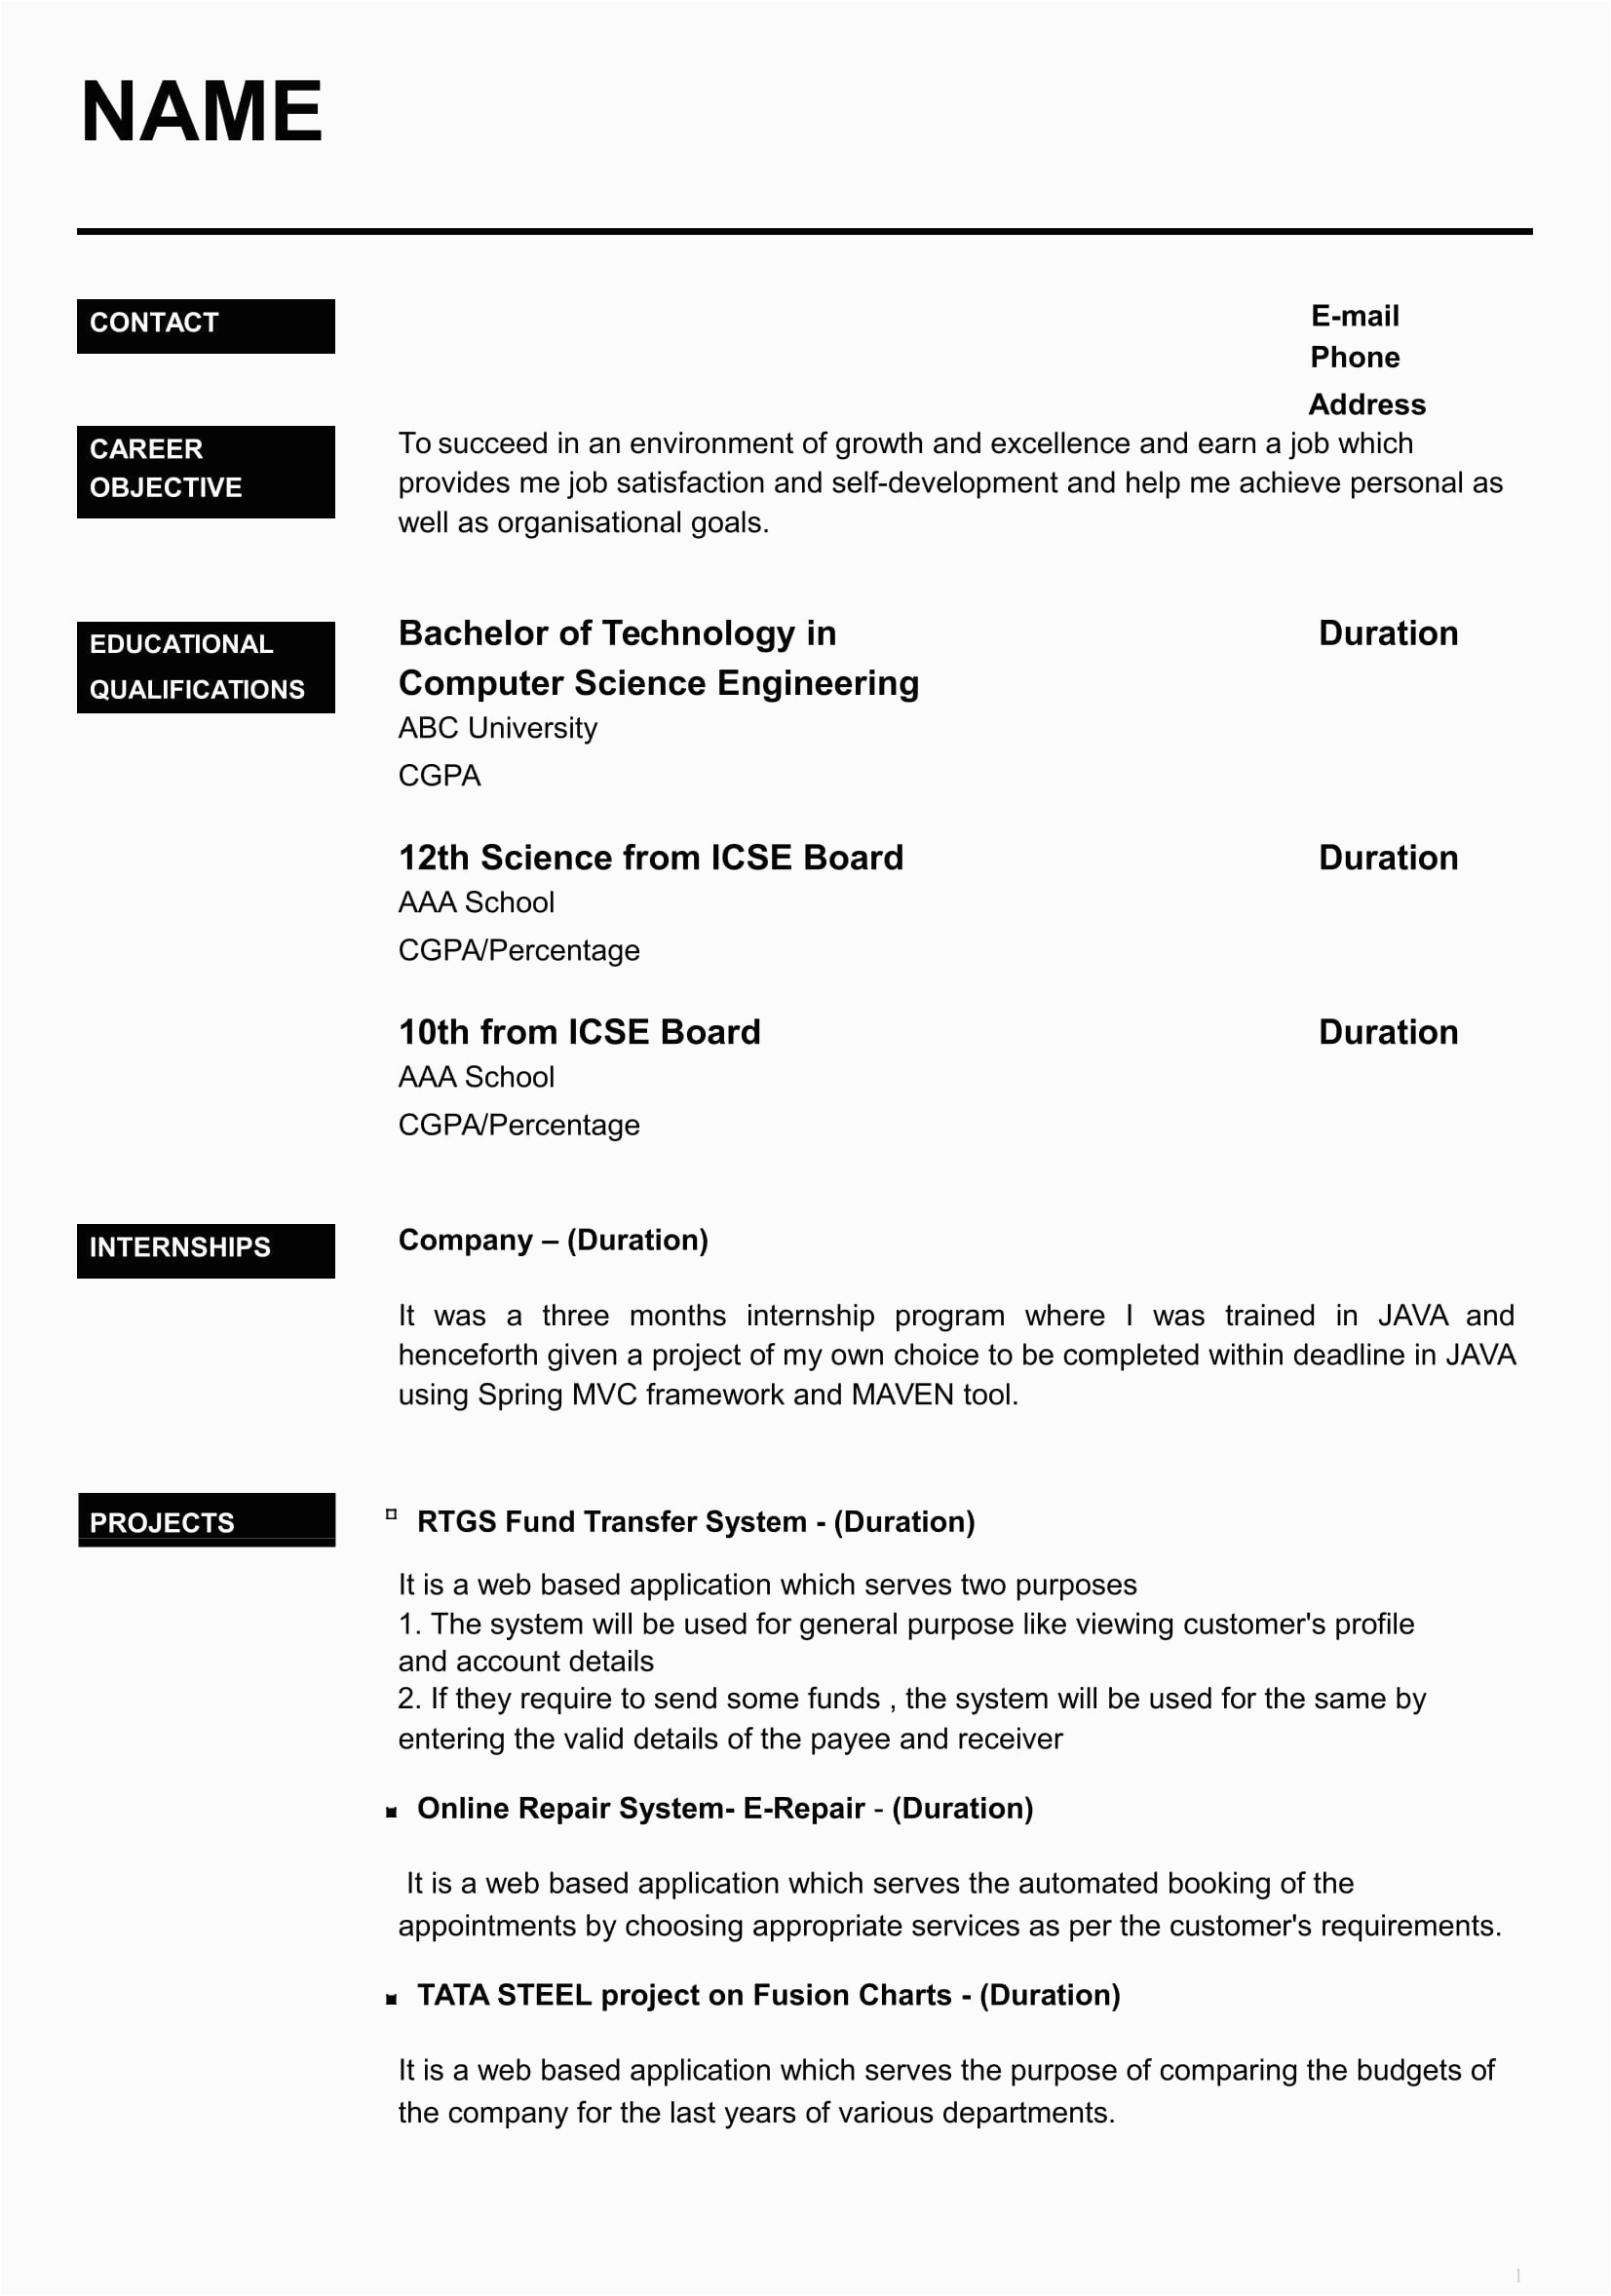 Resume Templates for Freshers Engineers Free Download Resume formats for 2020